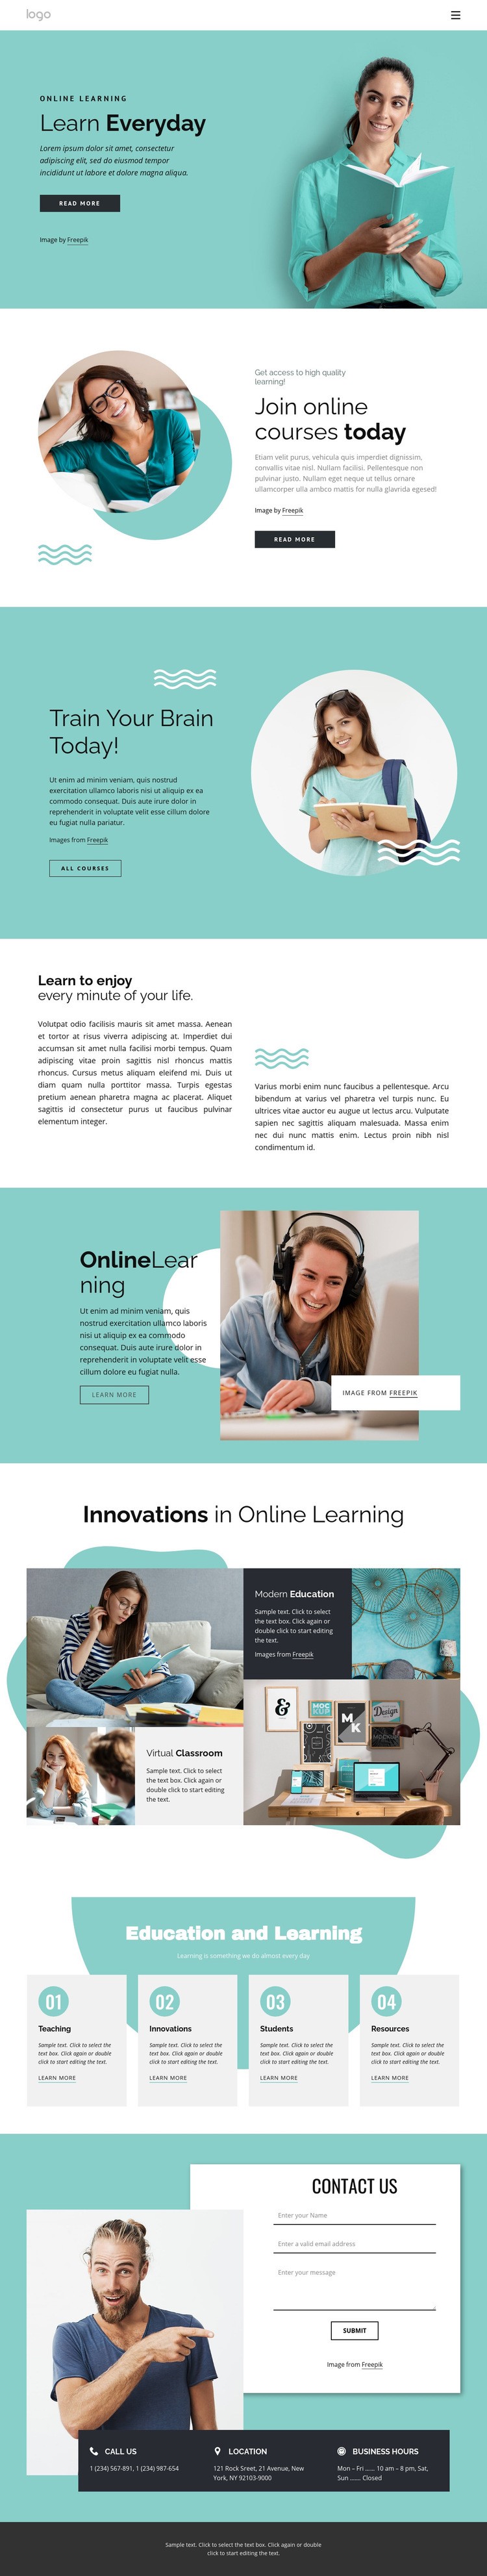 Learning is a lifelong process Homepage Design